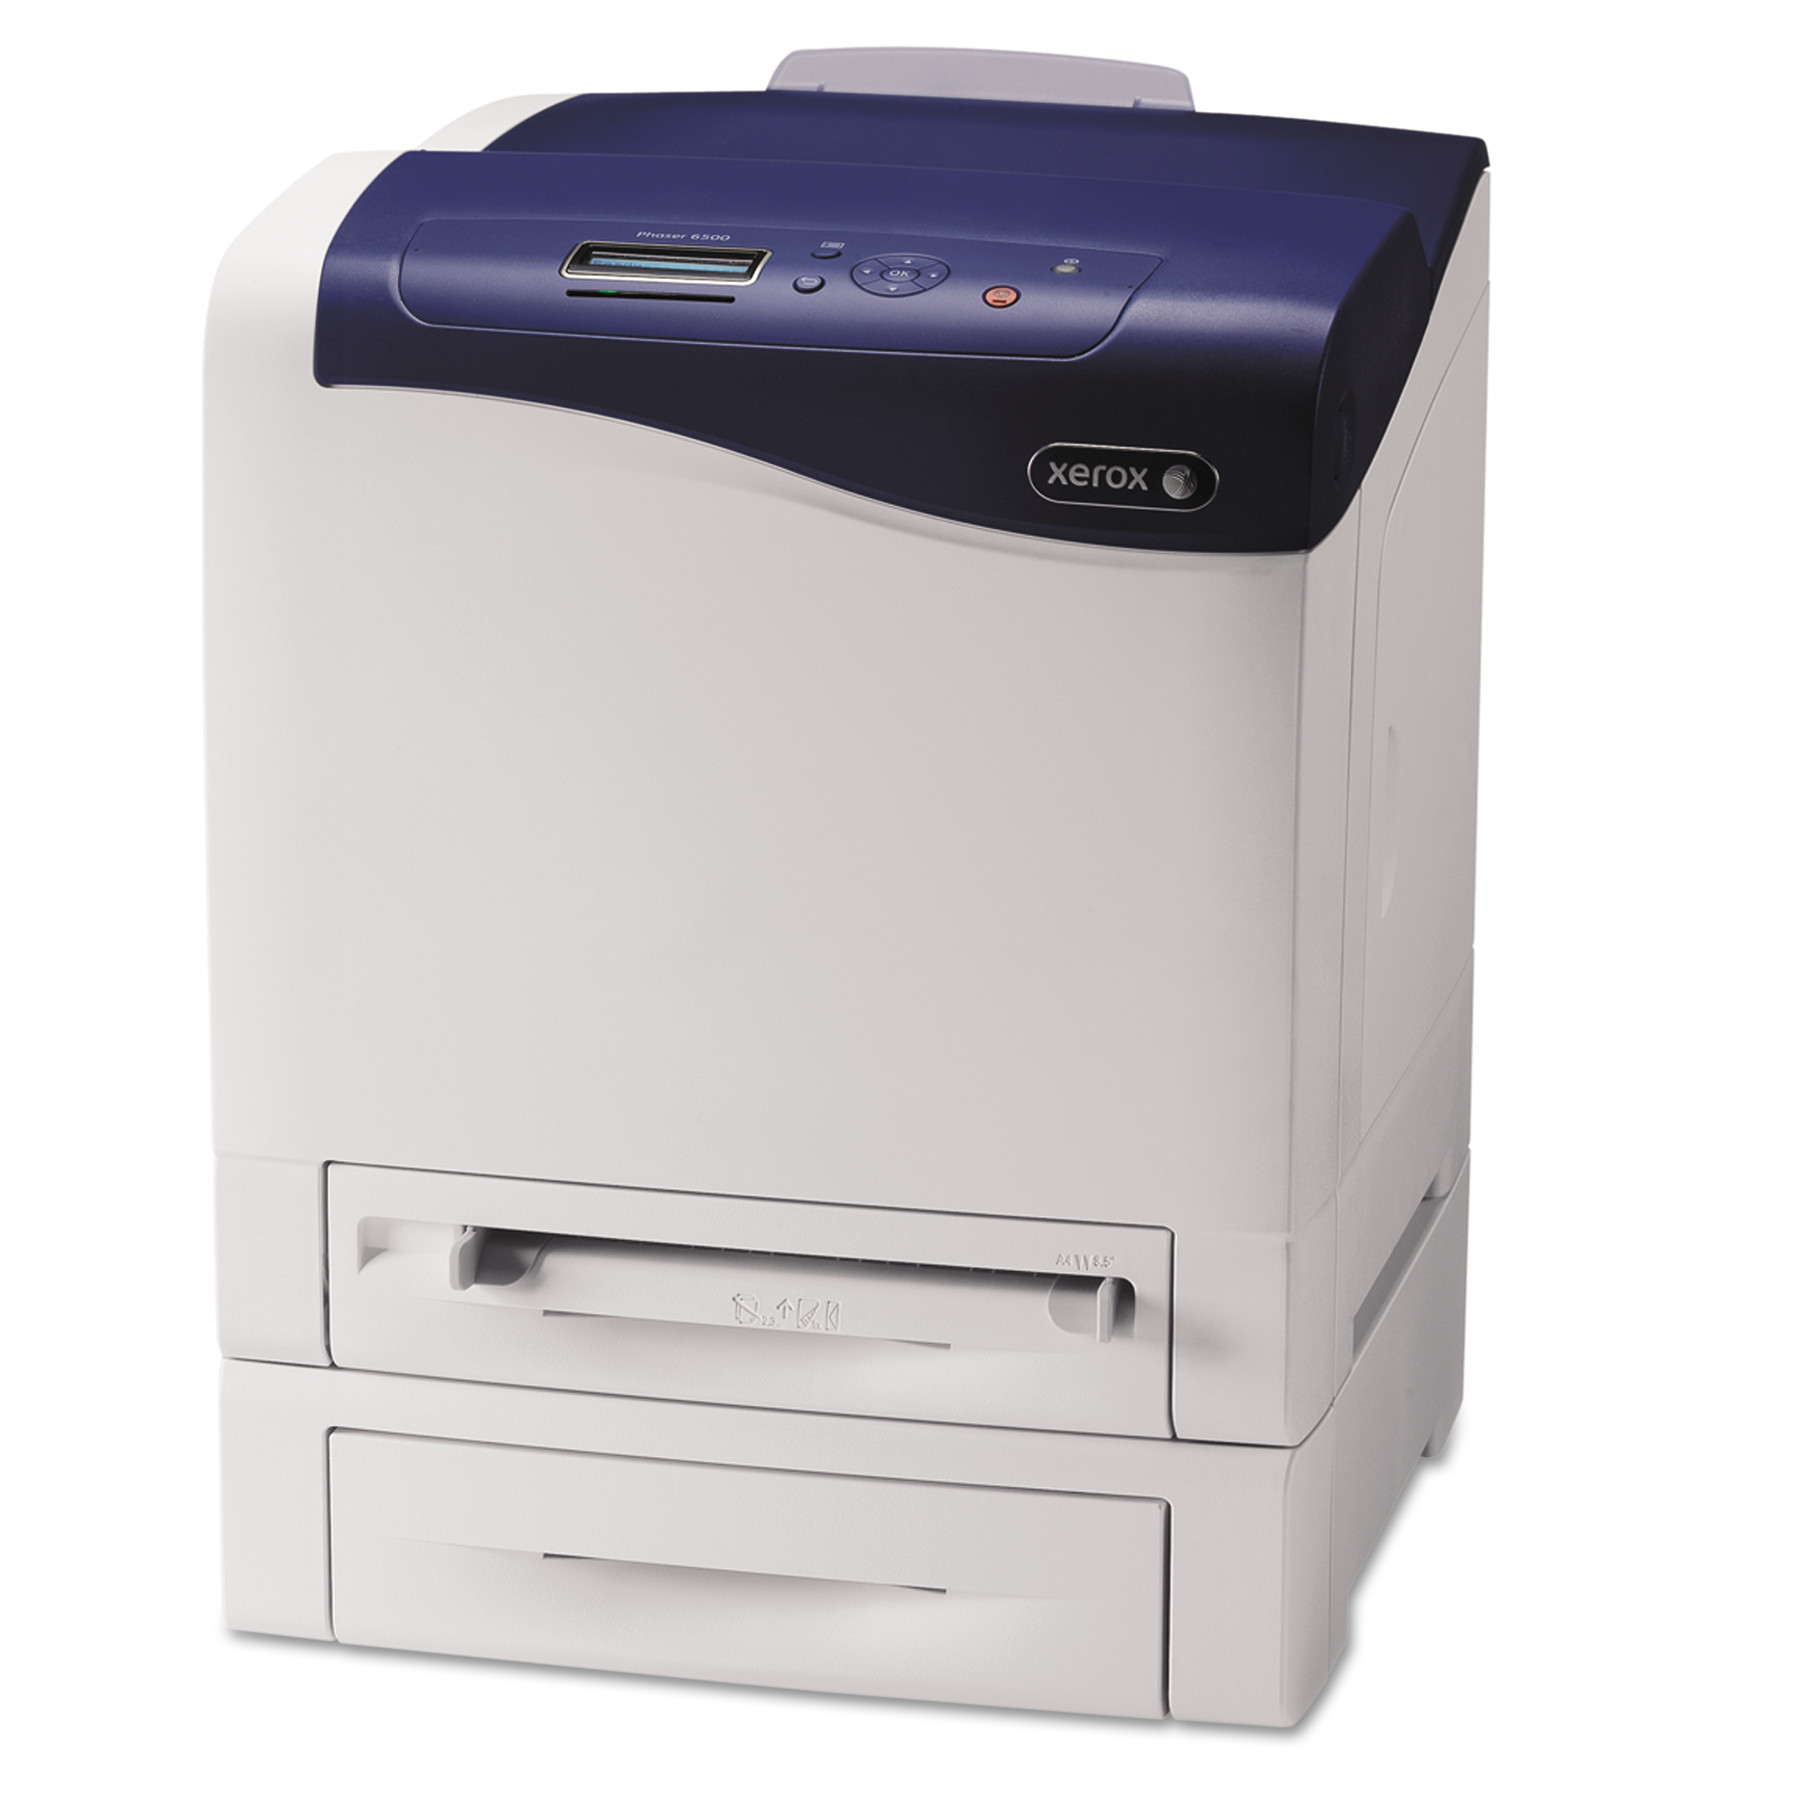 Xerox Phaser 6500/N Color Laser Printer, Networking - image 1 of 5